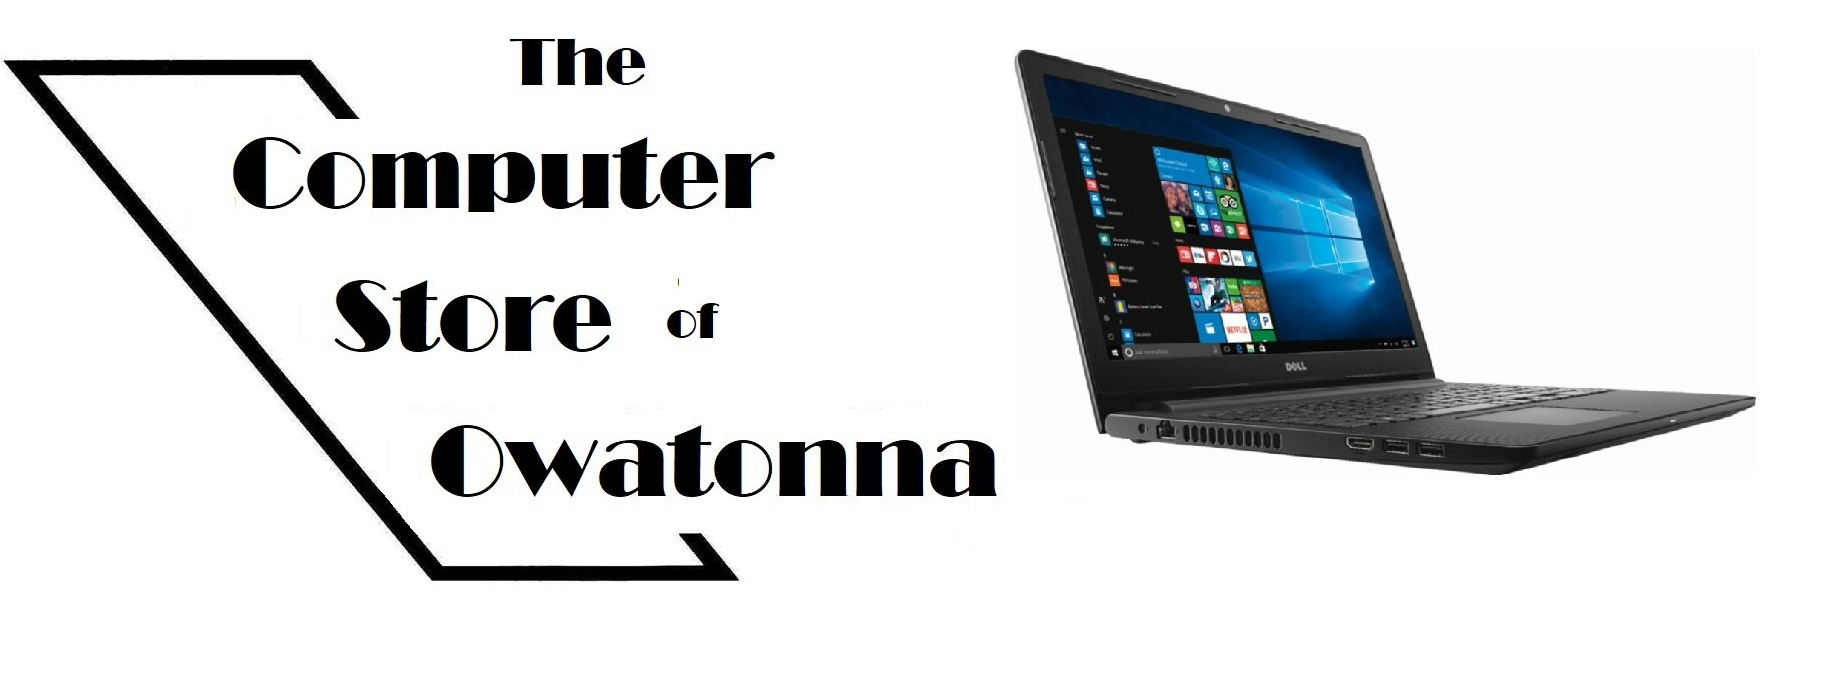 The Computer Store of Owatonna Logo